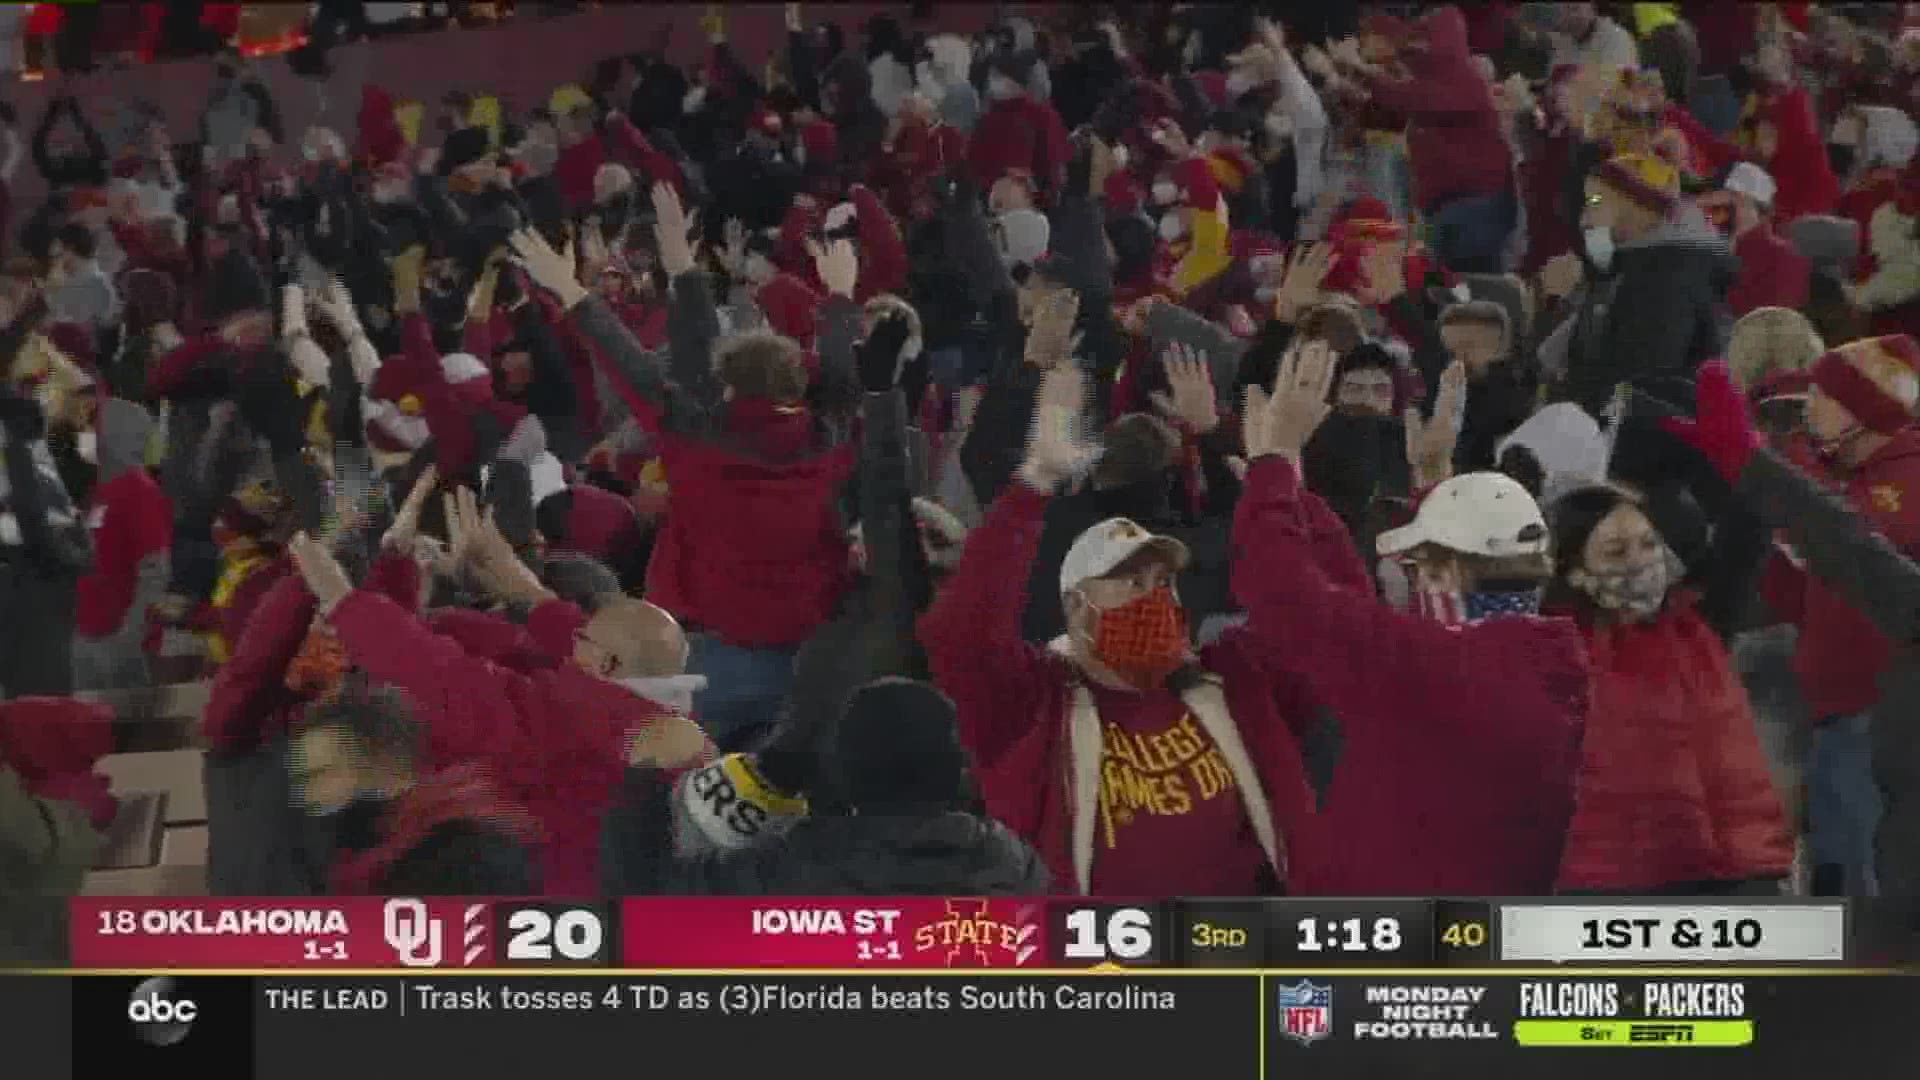 Iowa State was coming off their first win of the year over Texas Christian University. Now they're 2-1 on the season.